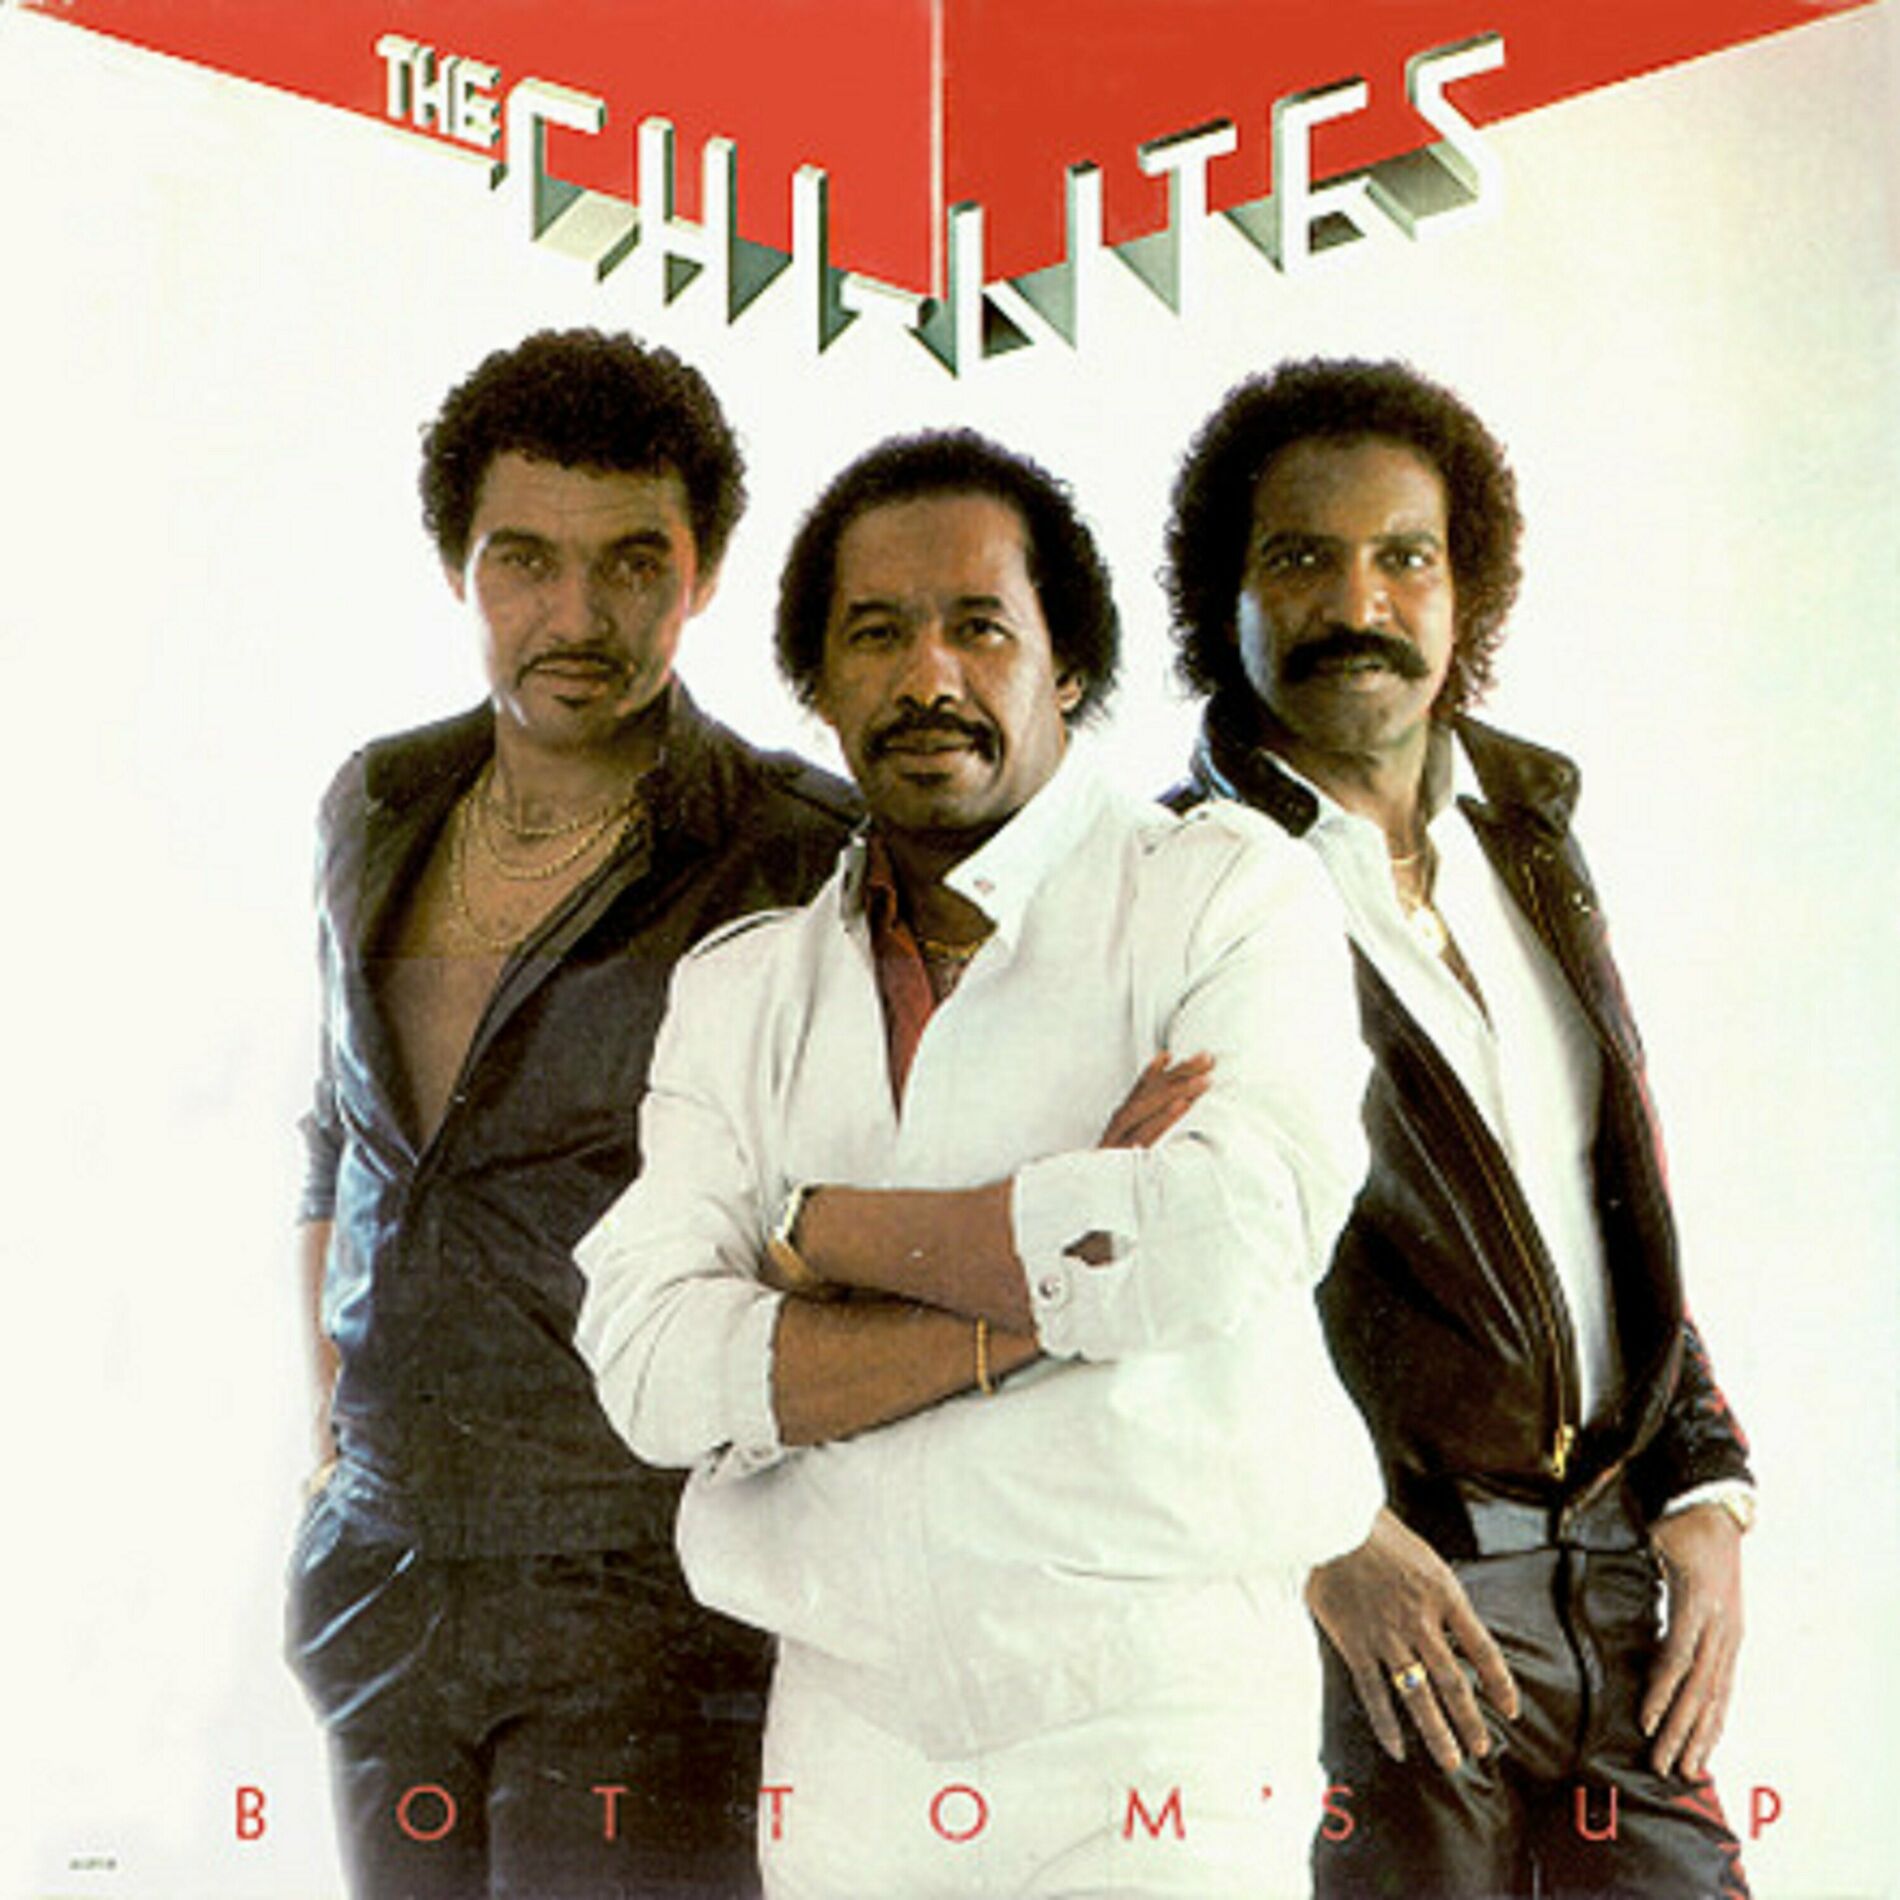 The Chi-Lites: albums, songs, playlists | Listen on Deezer